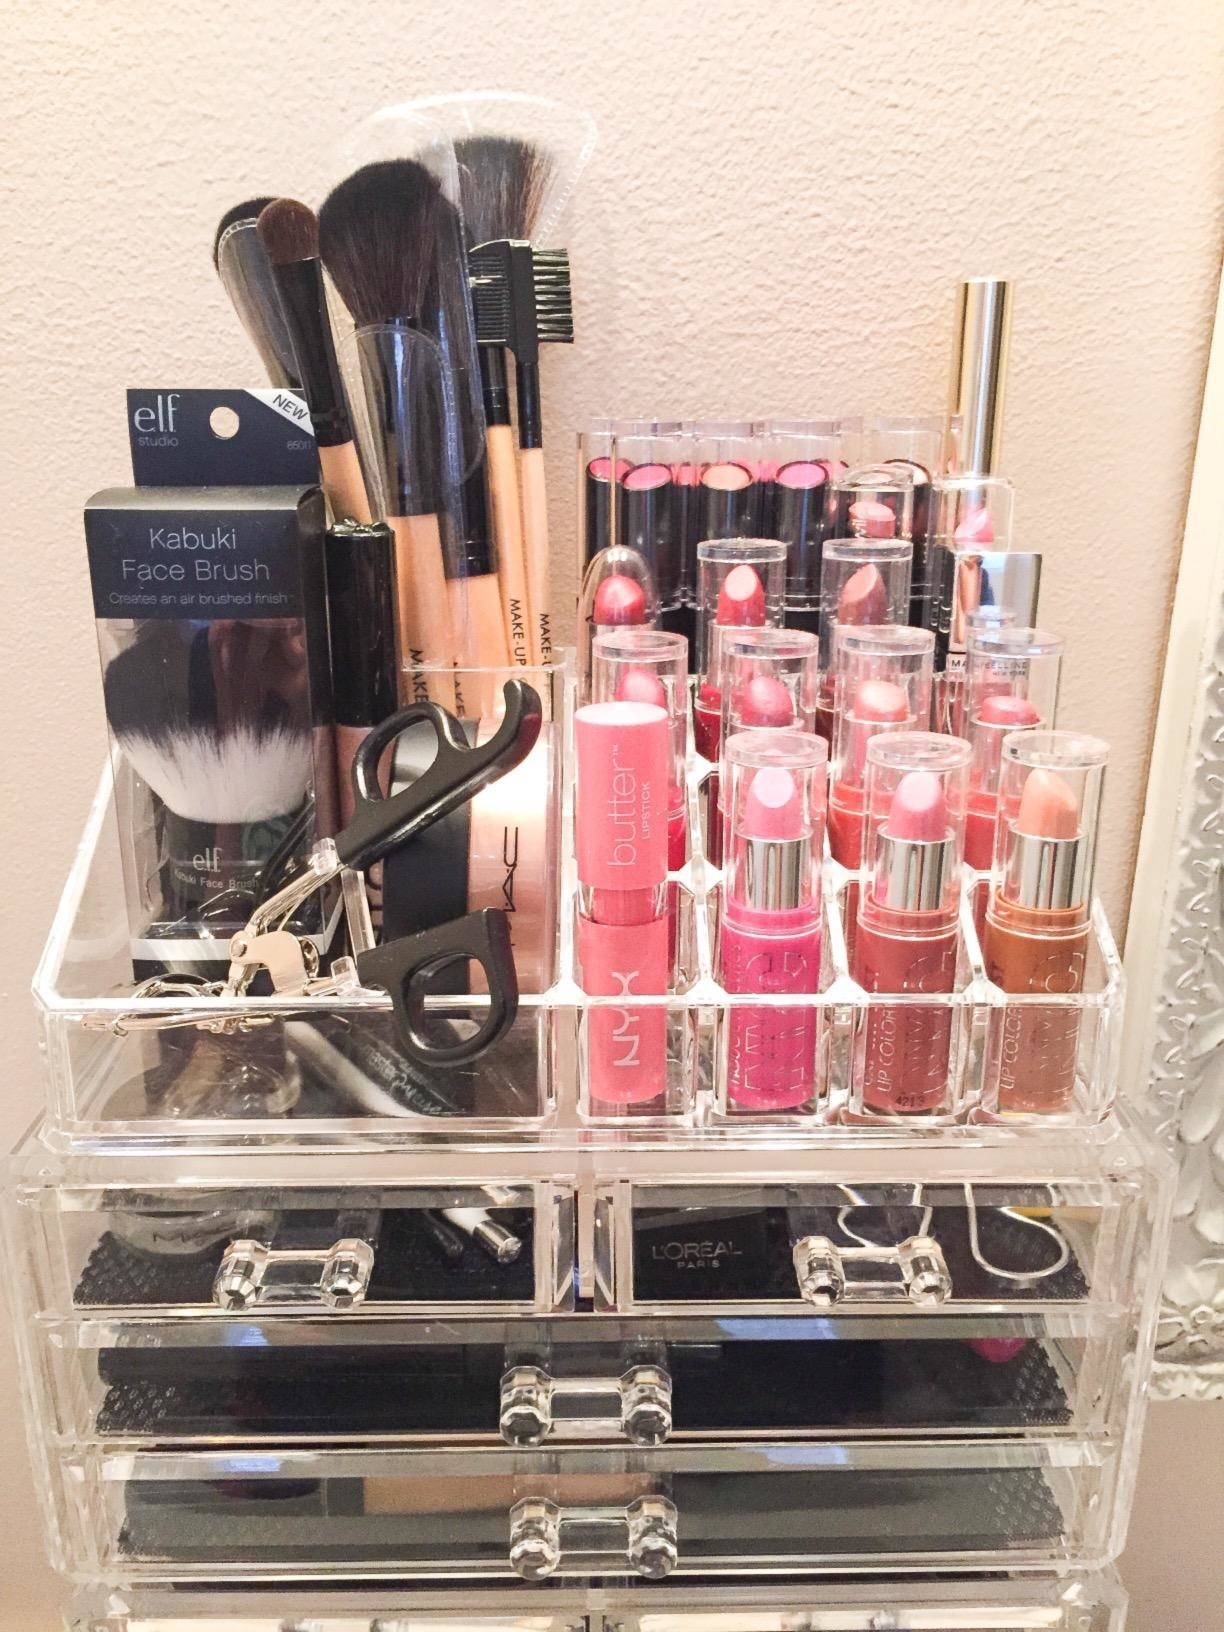 The clear Ikee Design Jewelry &amp;amp; Cosmetic Storage Display Boxes filled with makeup